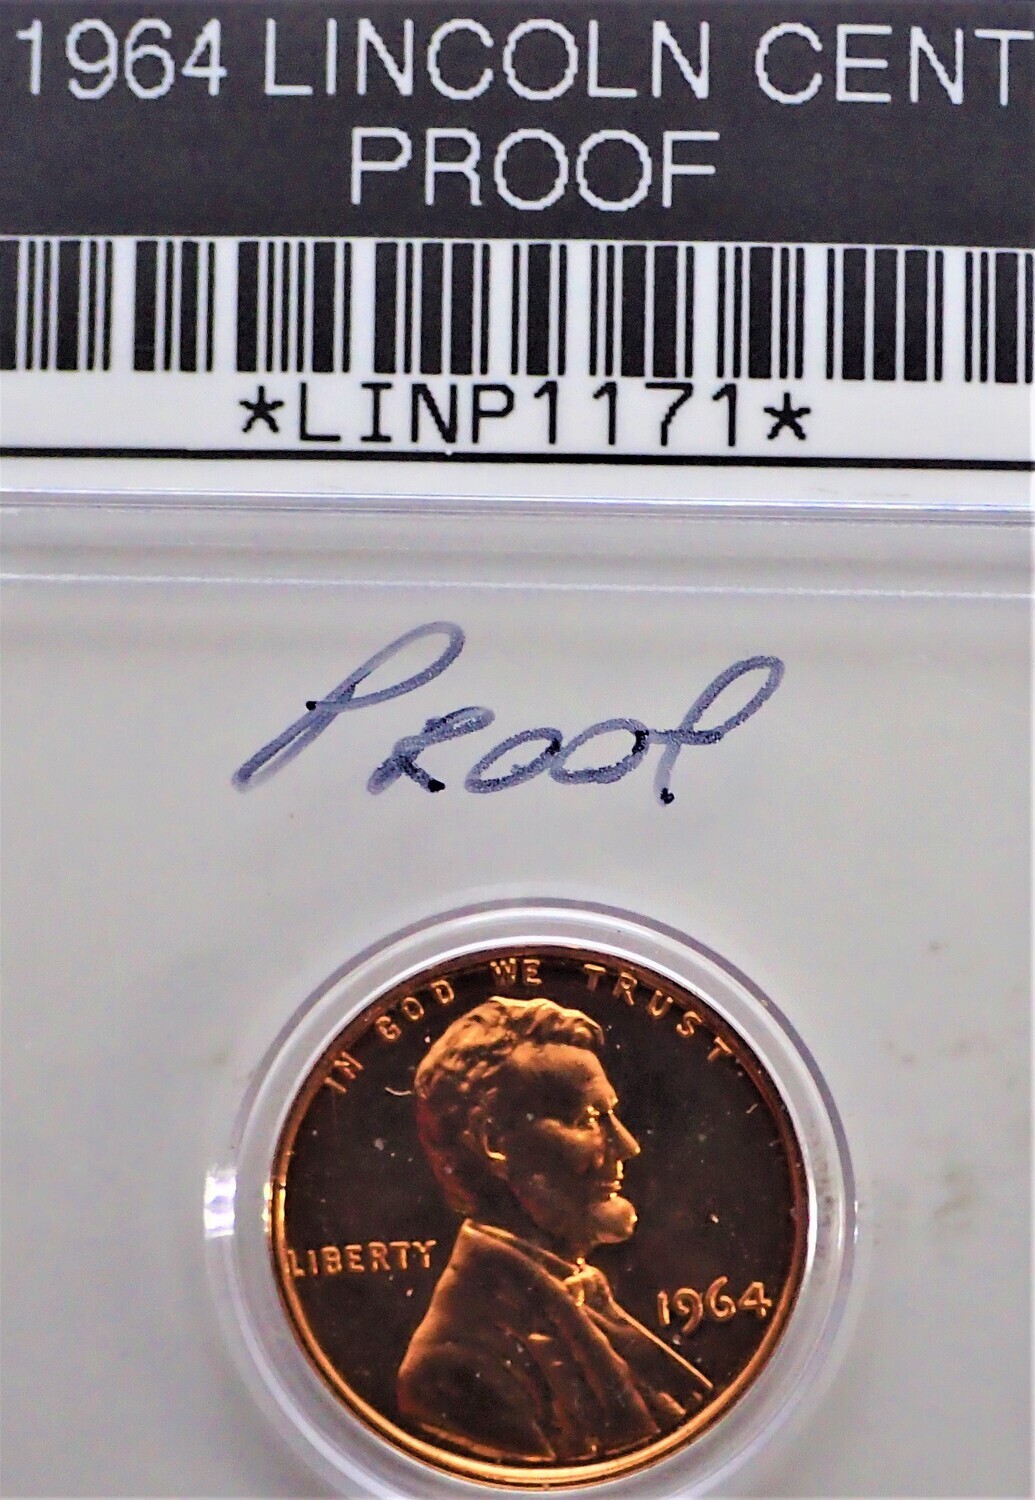 1964 LINCOLN CENT PROOF LINP1171